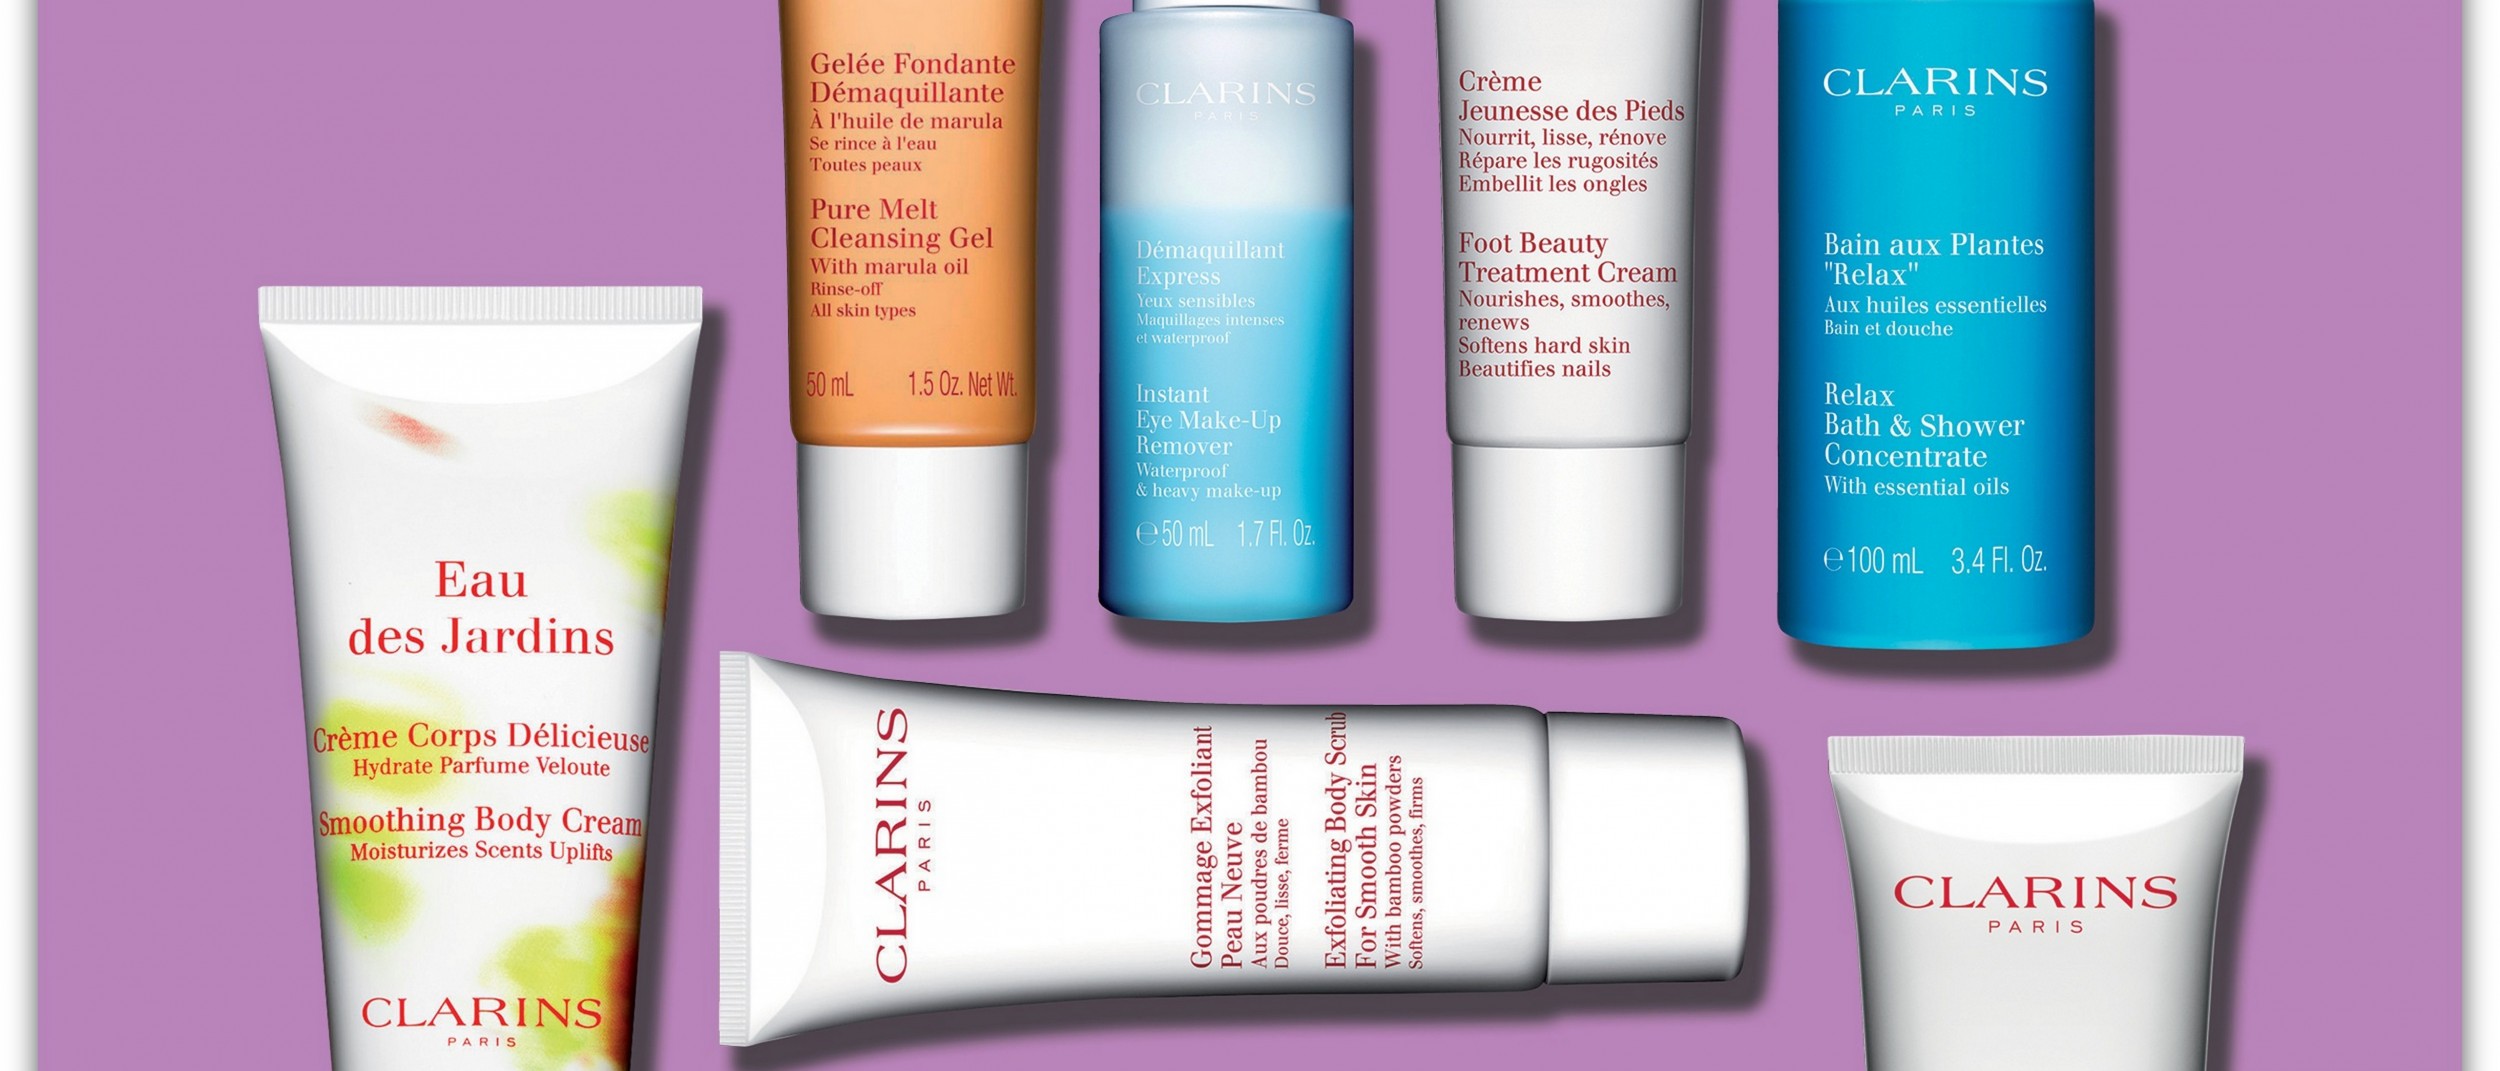 Big Beauty Gift offer from Clarins